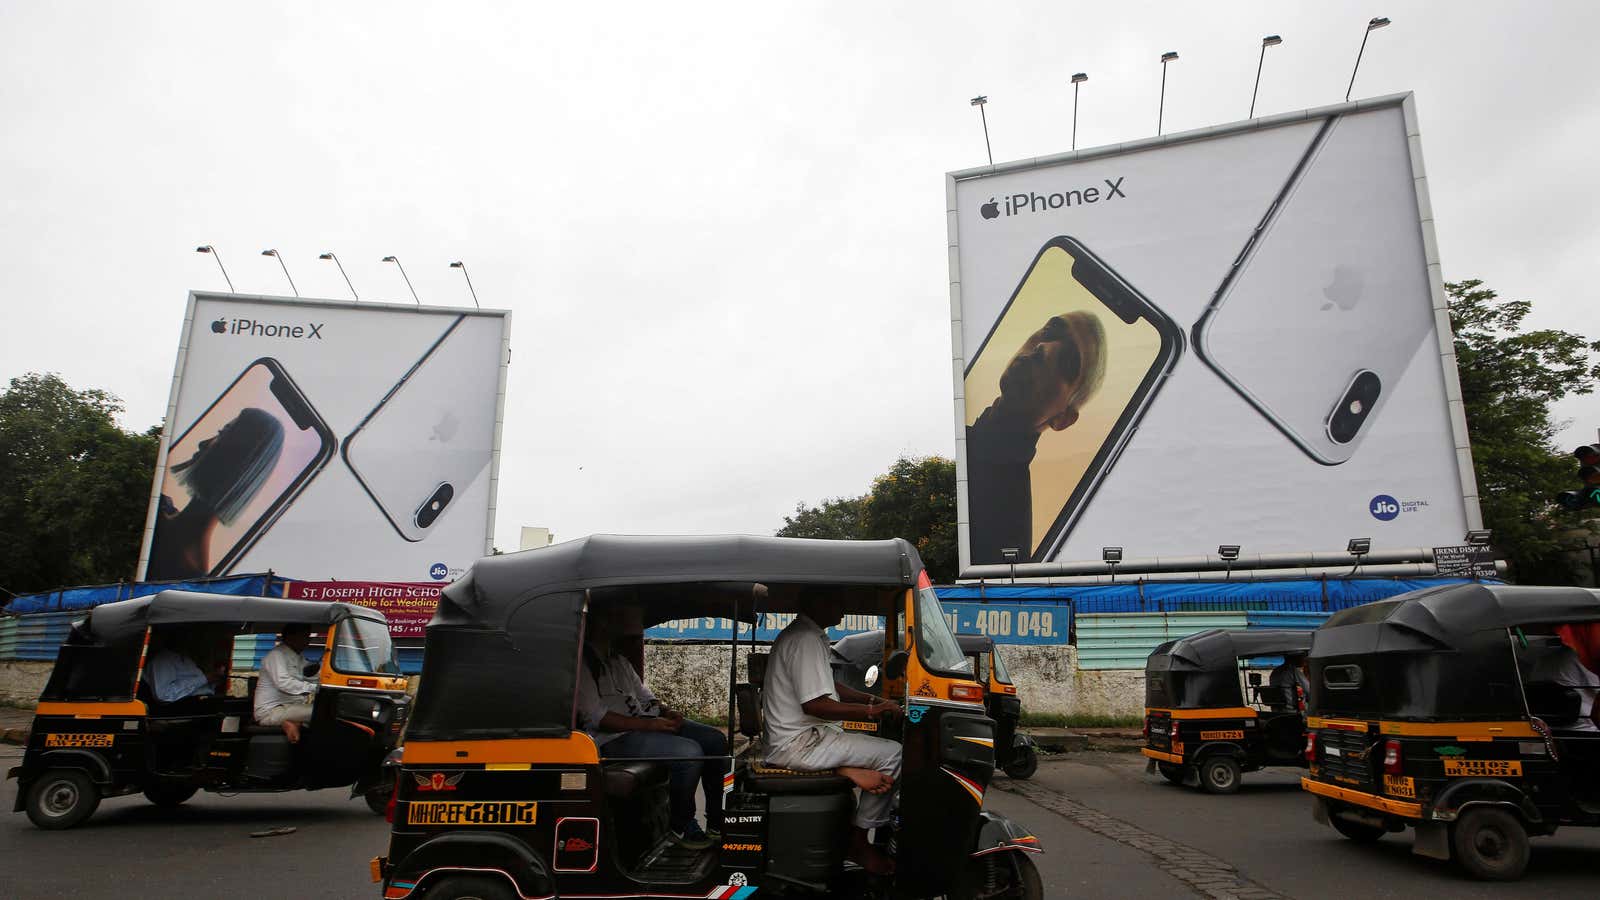 Apple's $2.5 billion iPhone shipments from India hint at a major manufacturing shift